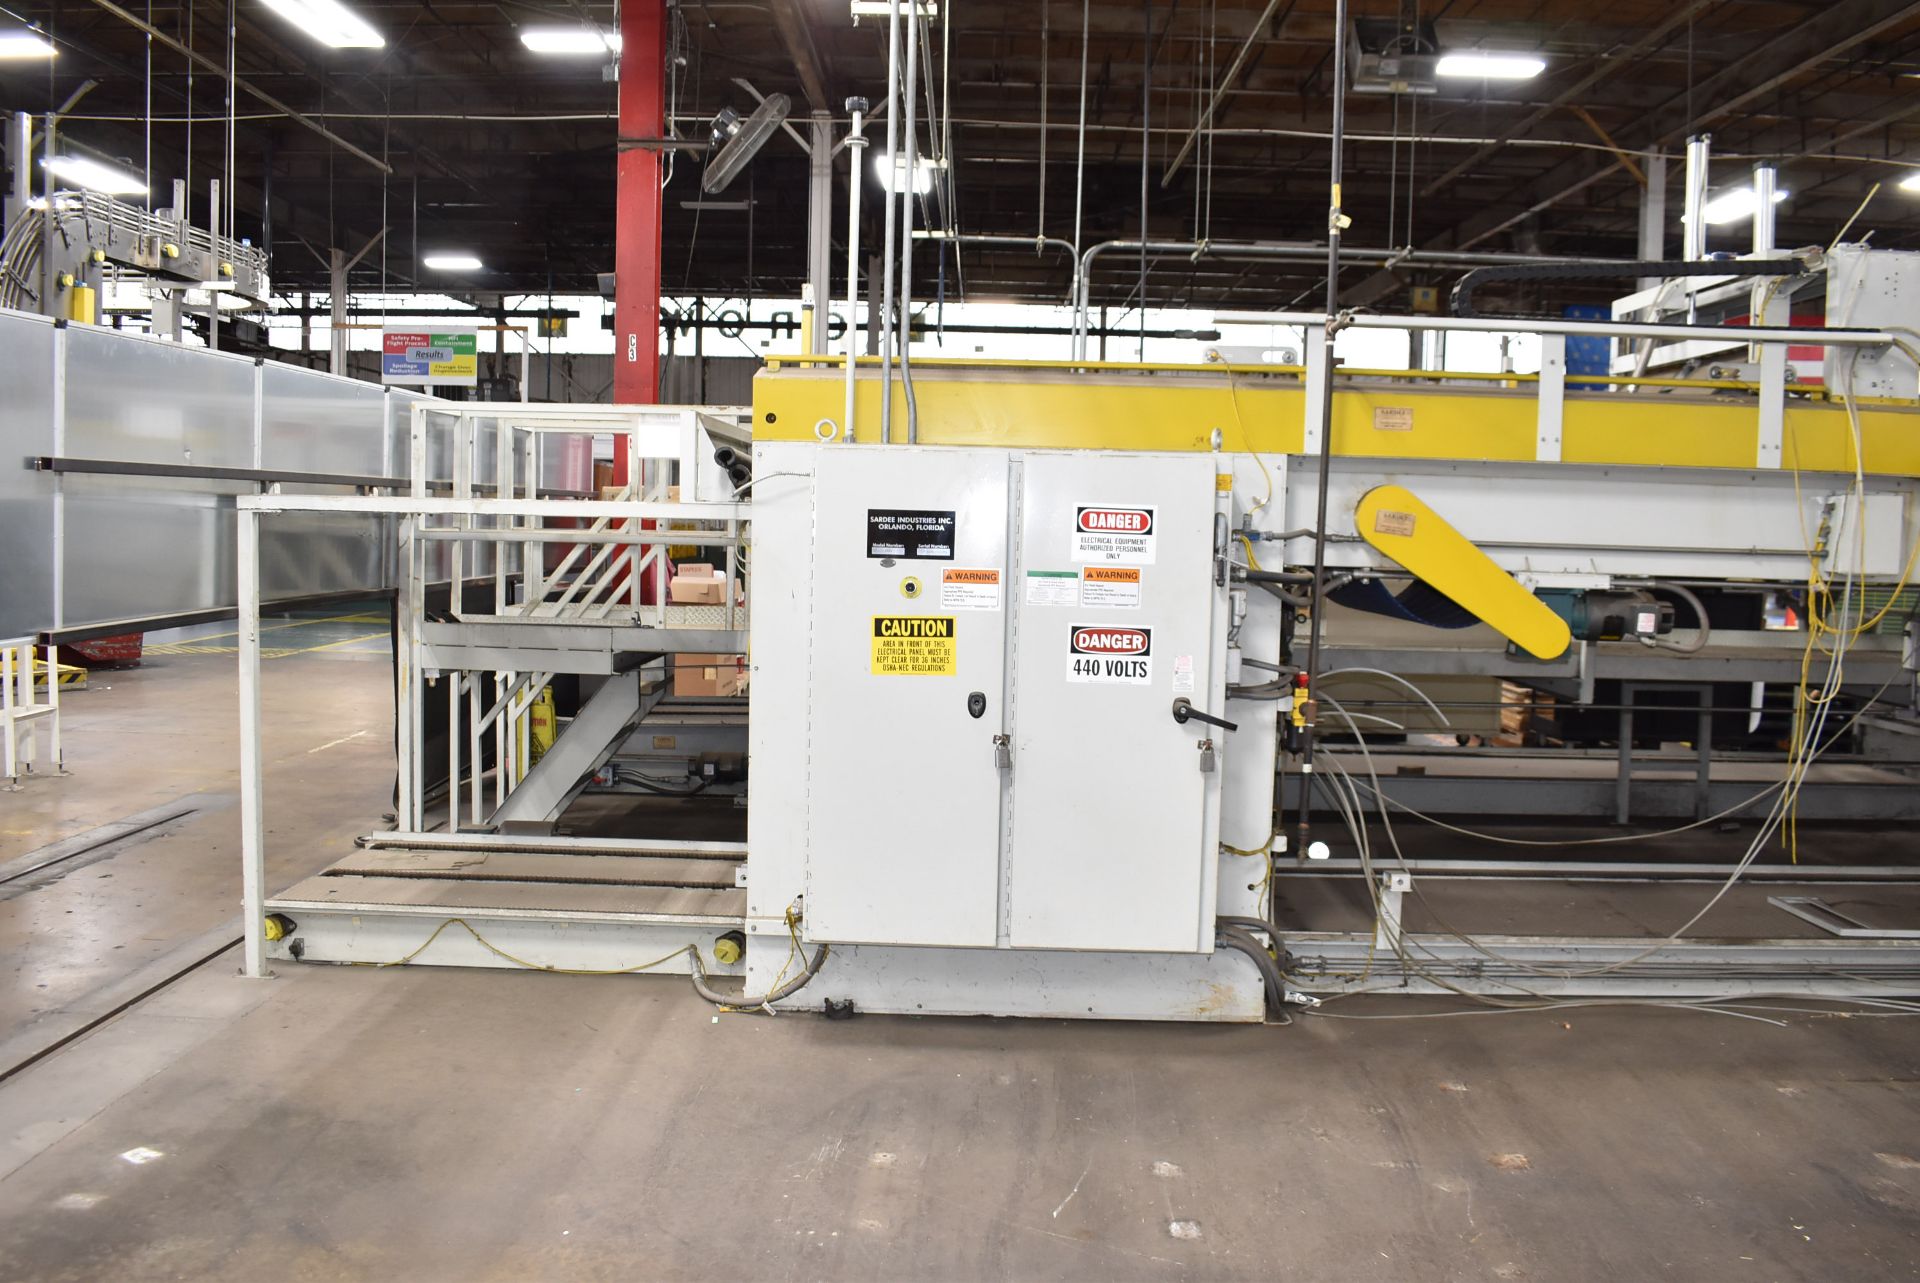 SARDEE INDUSTRIES 3500 PALLETIZER WITH ALLEN BRADLEY PANEL VIEW 600 TOUCH SCREEN CONTROL, BANNER - Image 17 of 27